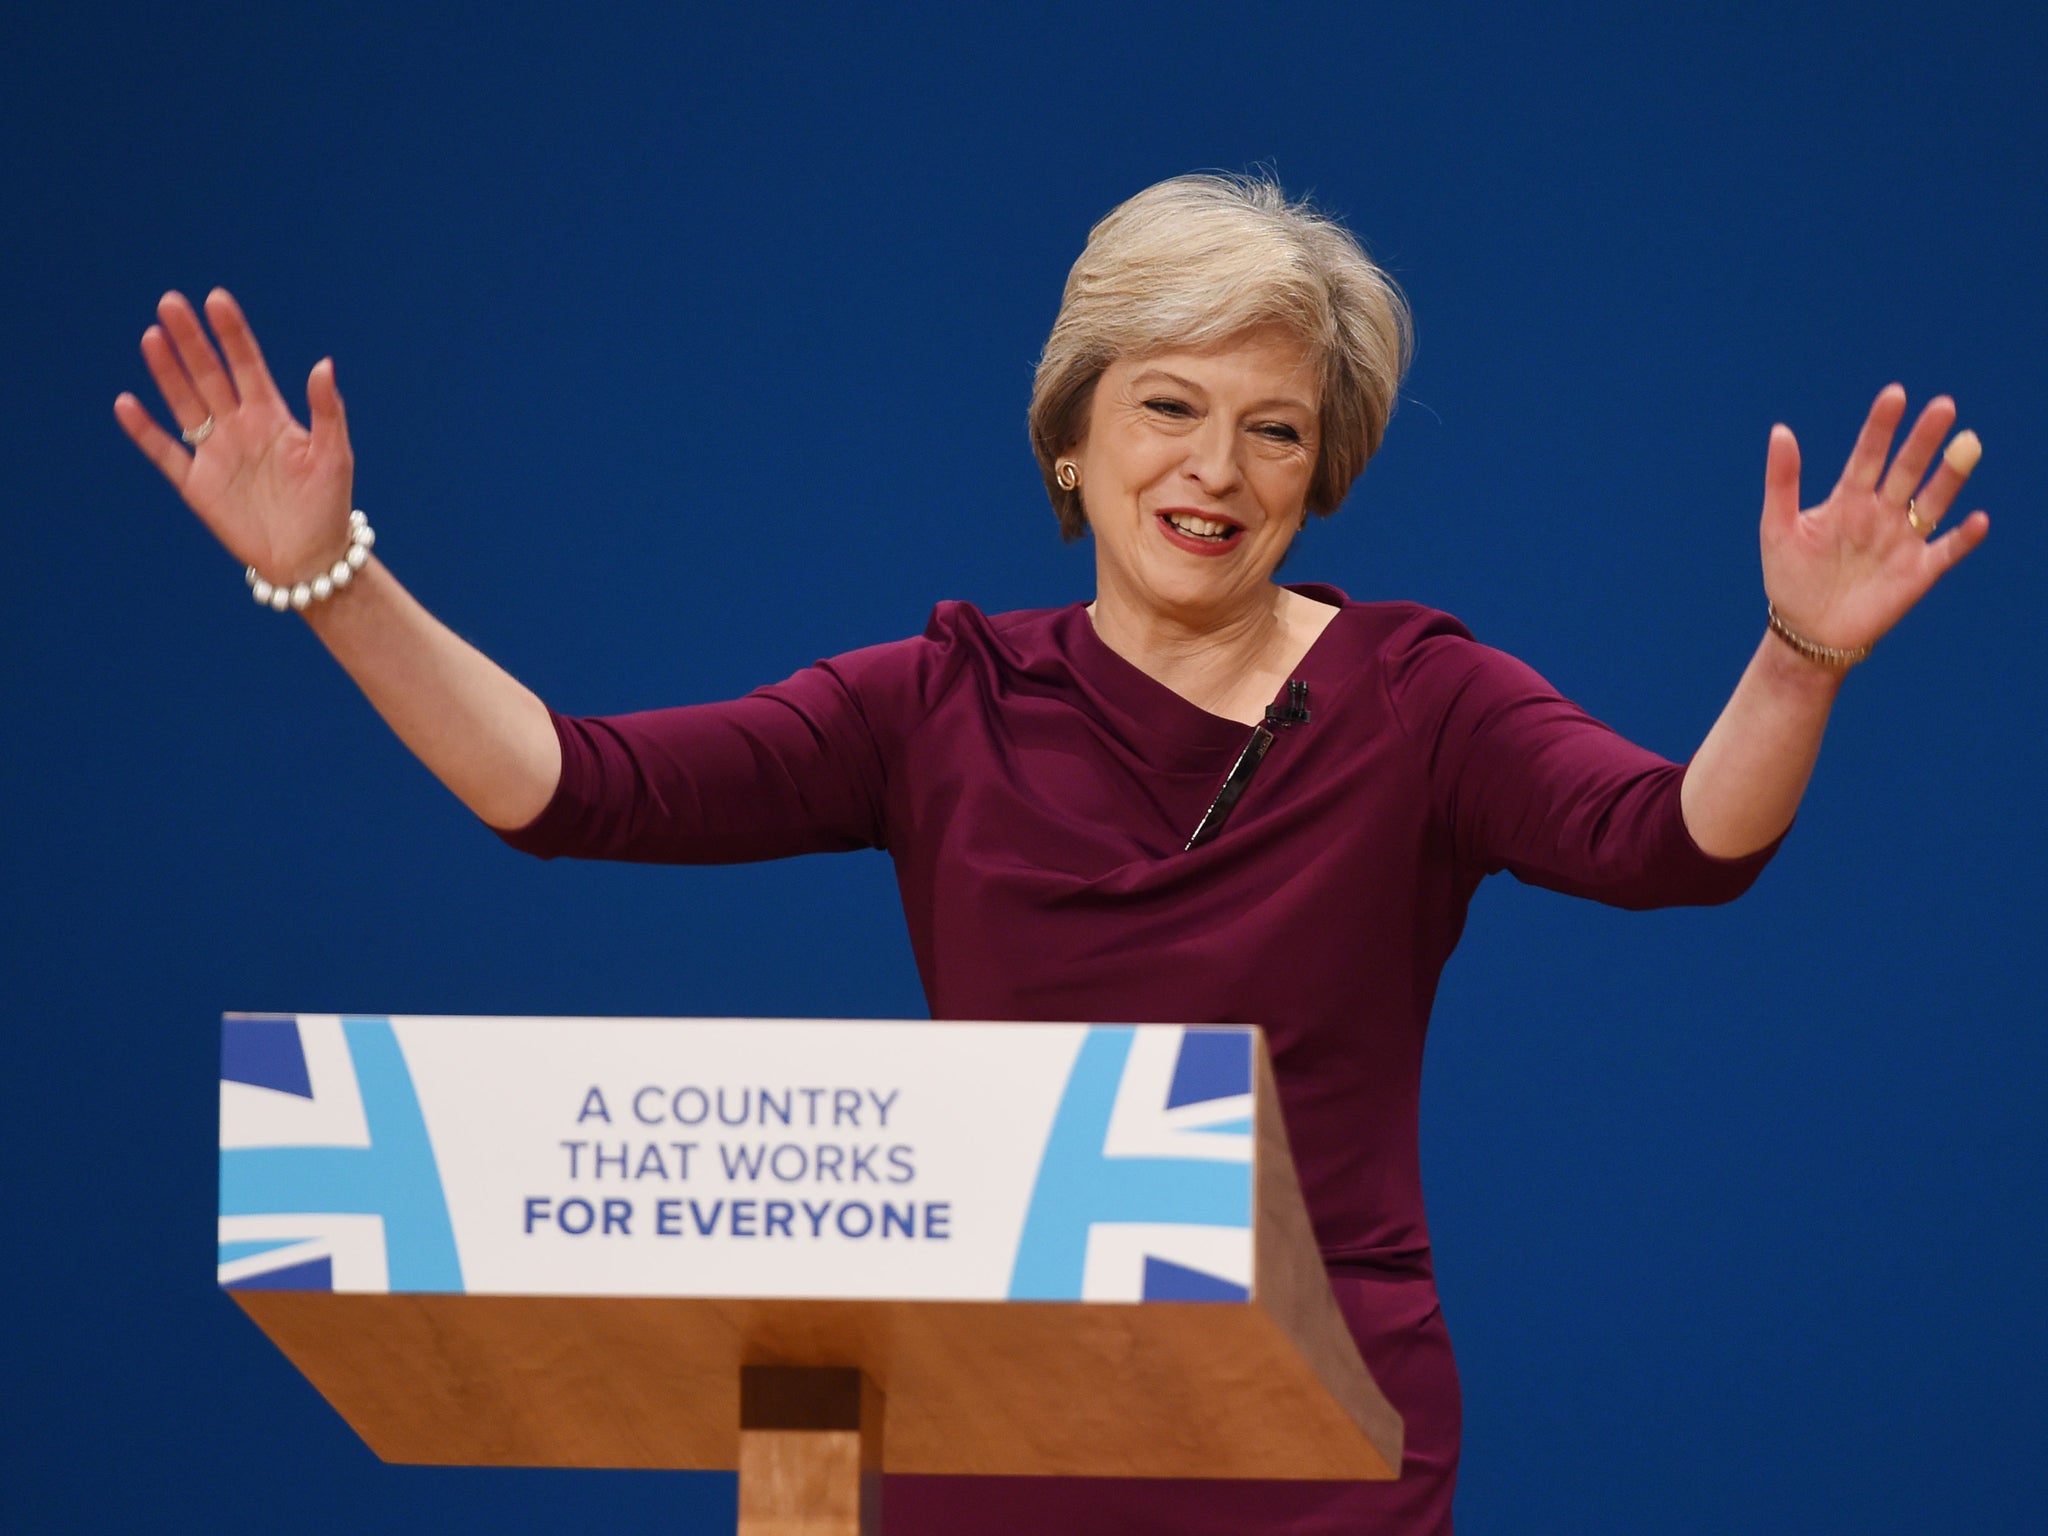 Prime Minister Theresa May makes her keynote address on the fourth day of the Conservative party conference